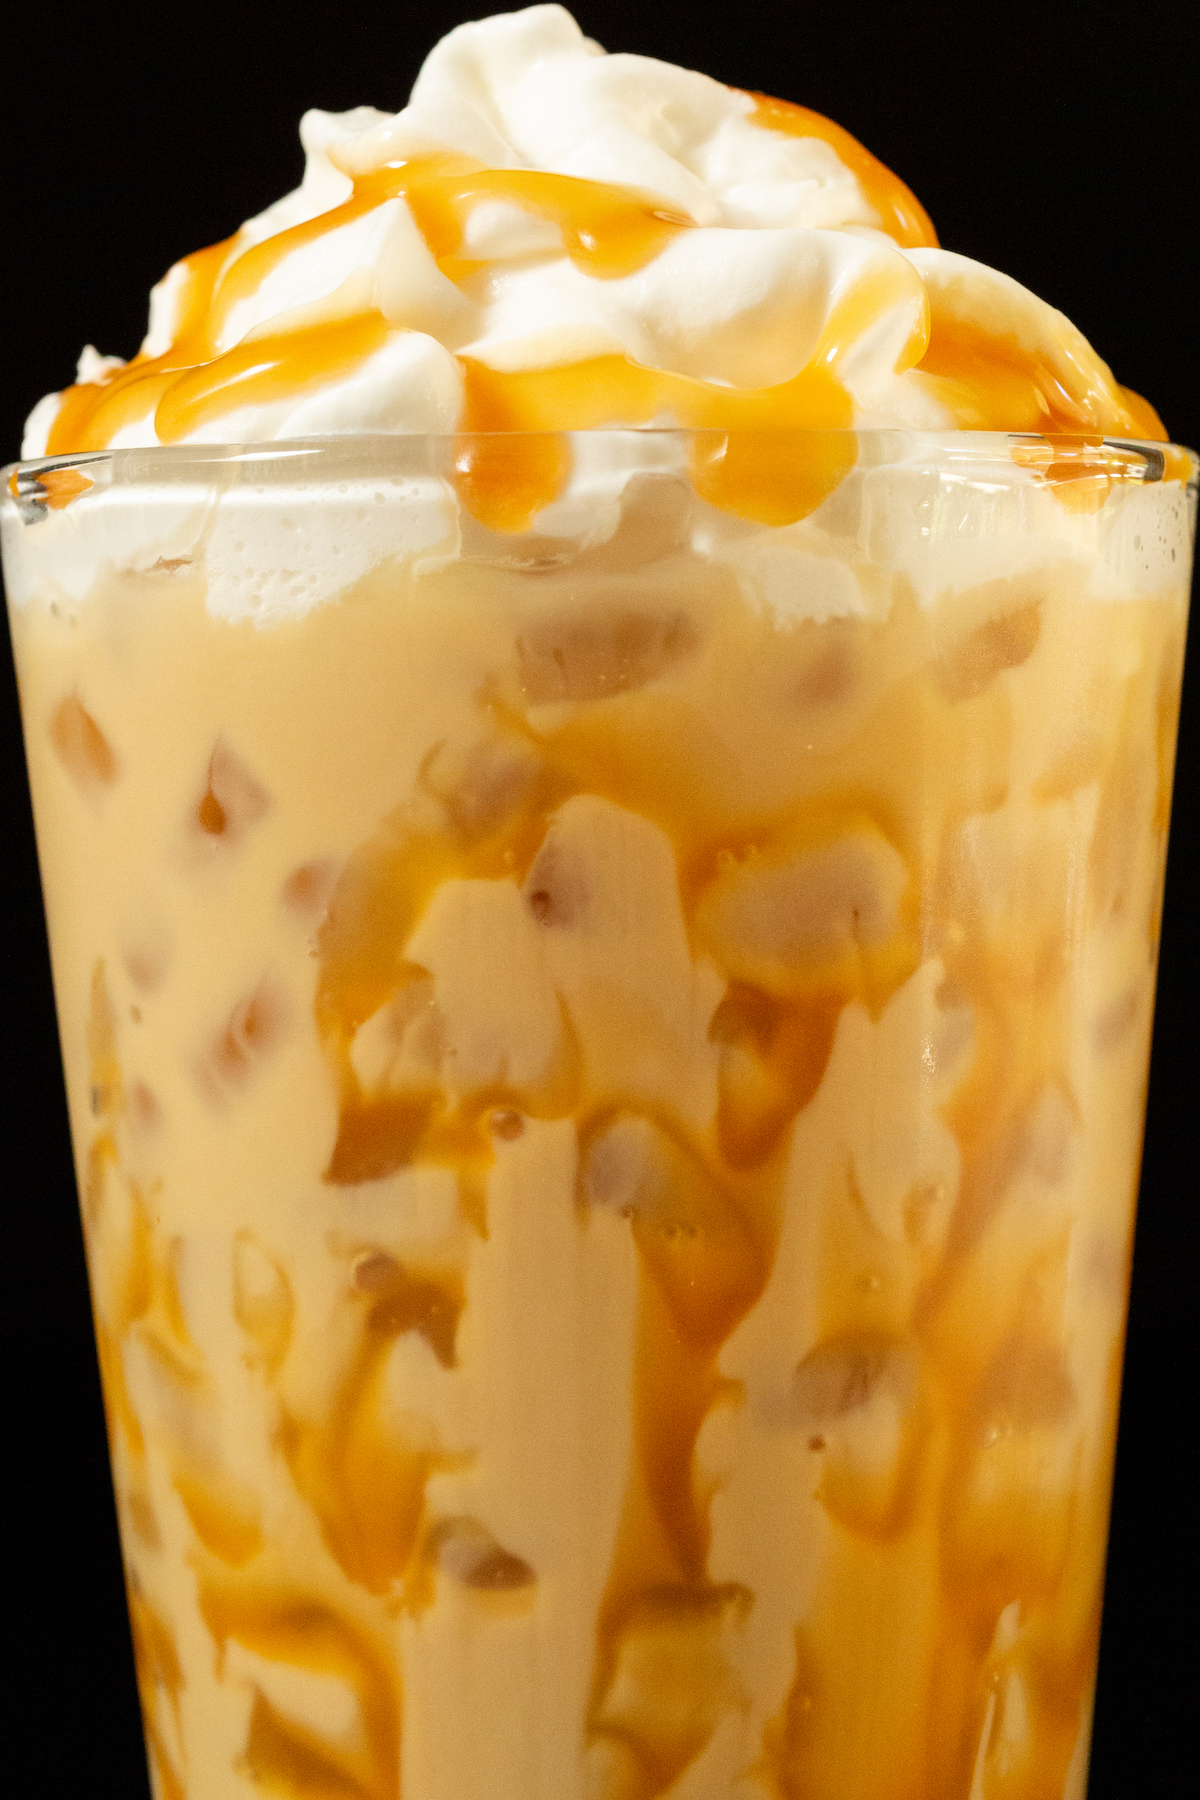 Close up of a butterbeer latte in a pint glass. Caramel has been drizzled all over the inside of the glass and on top of the whipped cream topping.